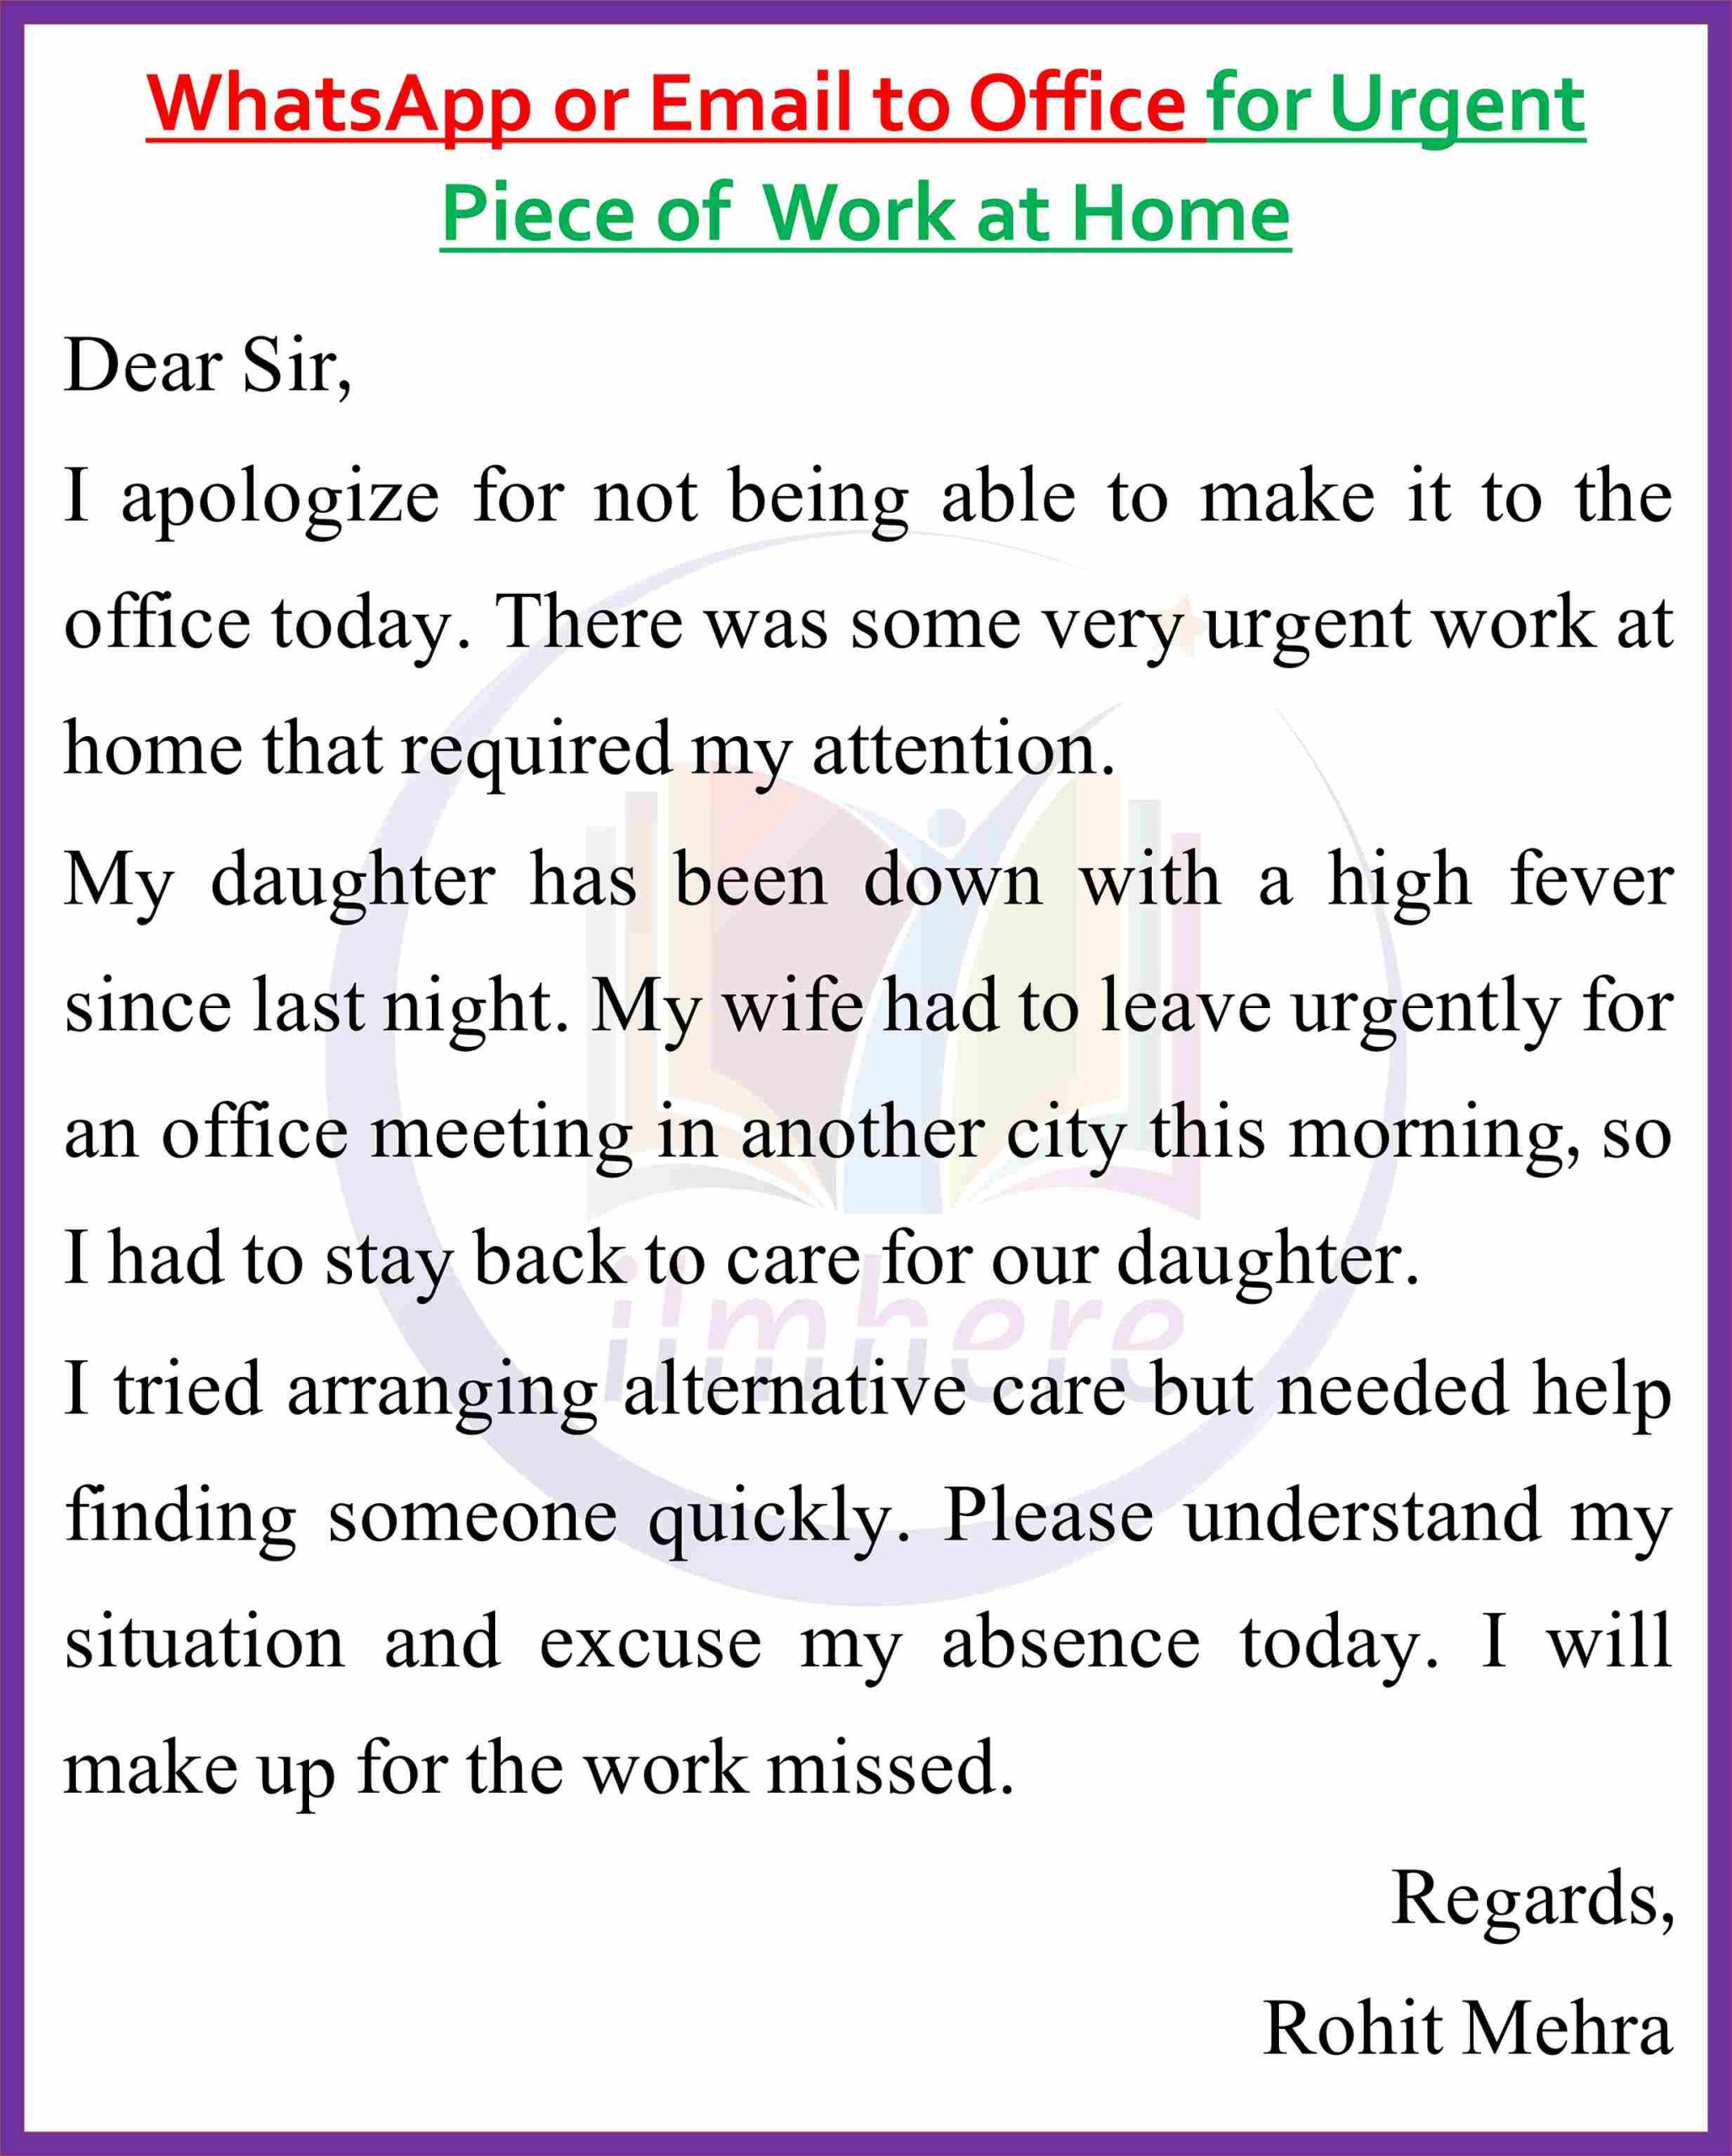 WhatsApp or Email to Office for Urgent Piece of Work at Home